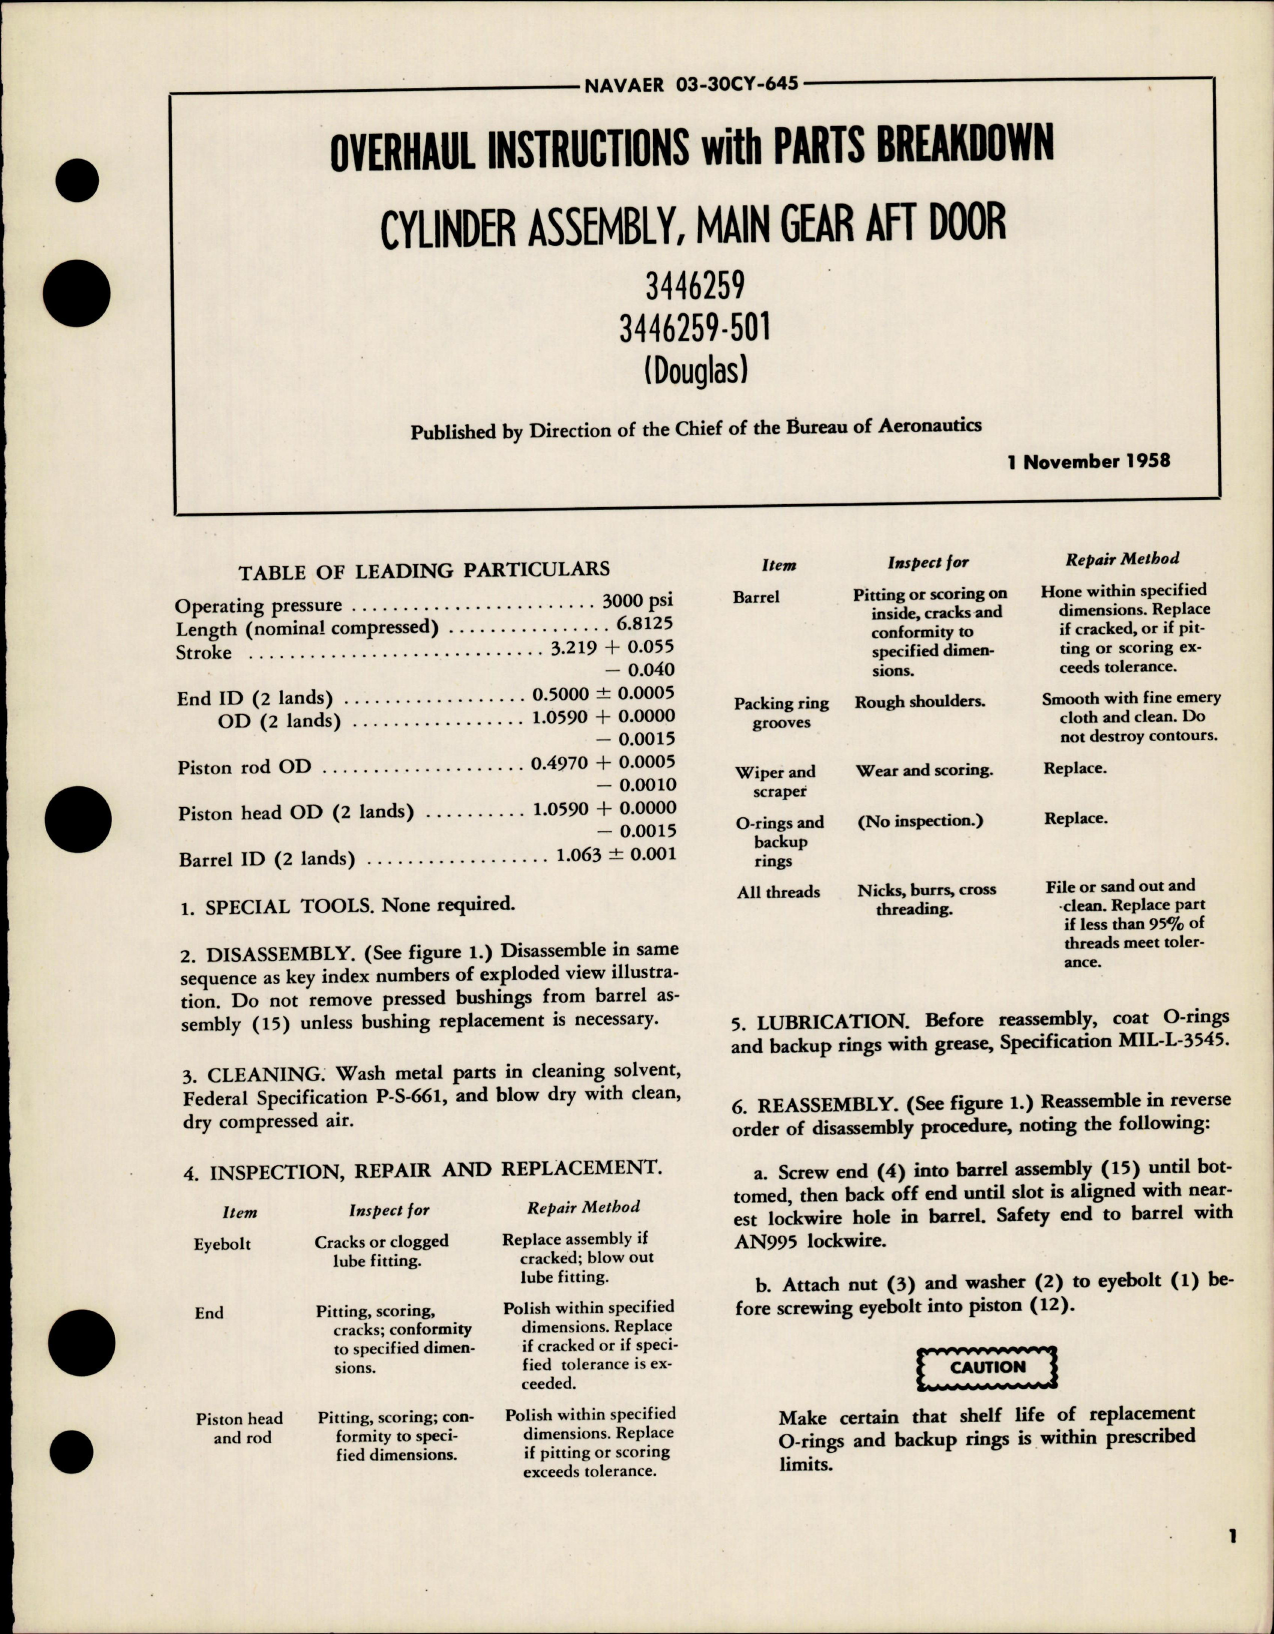 Sample page 1 from AirCorps Library document: Overhaul Instructions with Parts for Main Gear Aft Door Cylinder Assembly - 3446259, 3446259-501